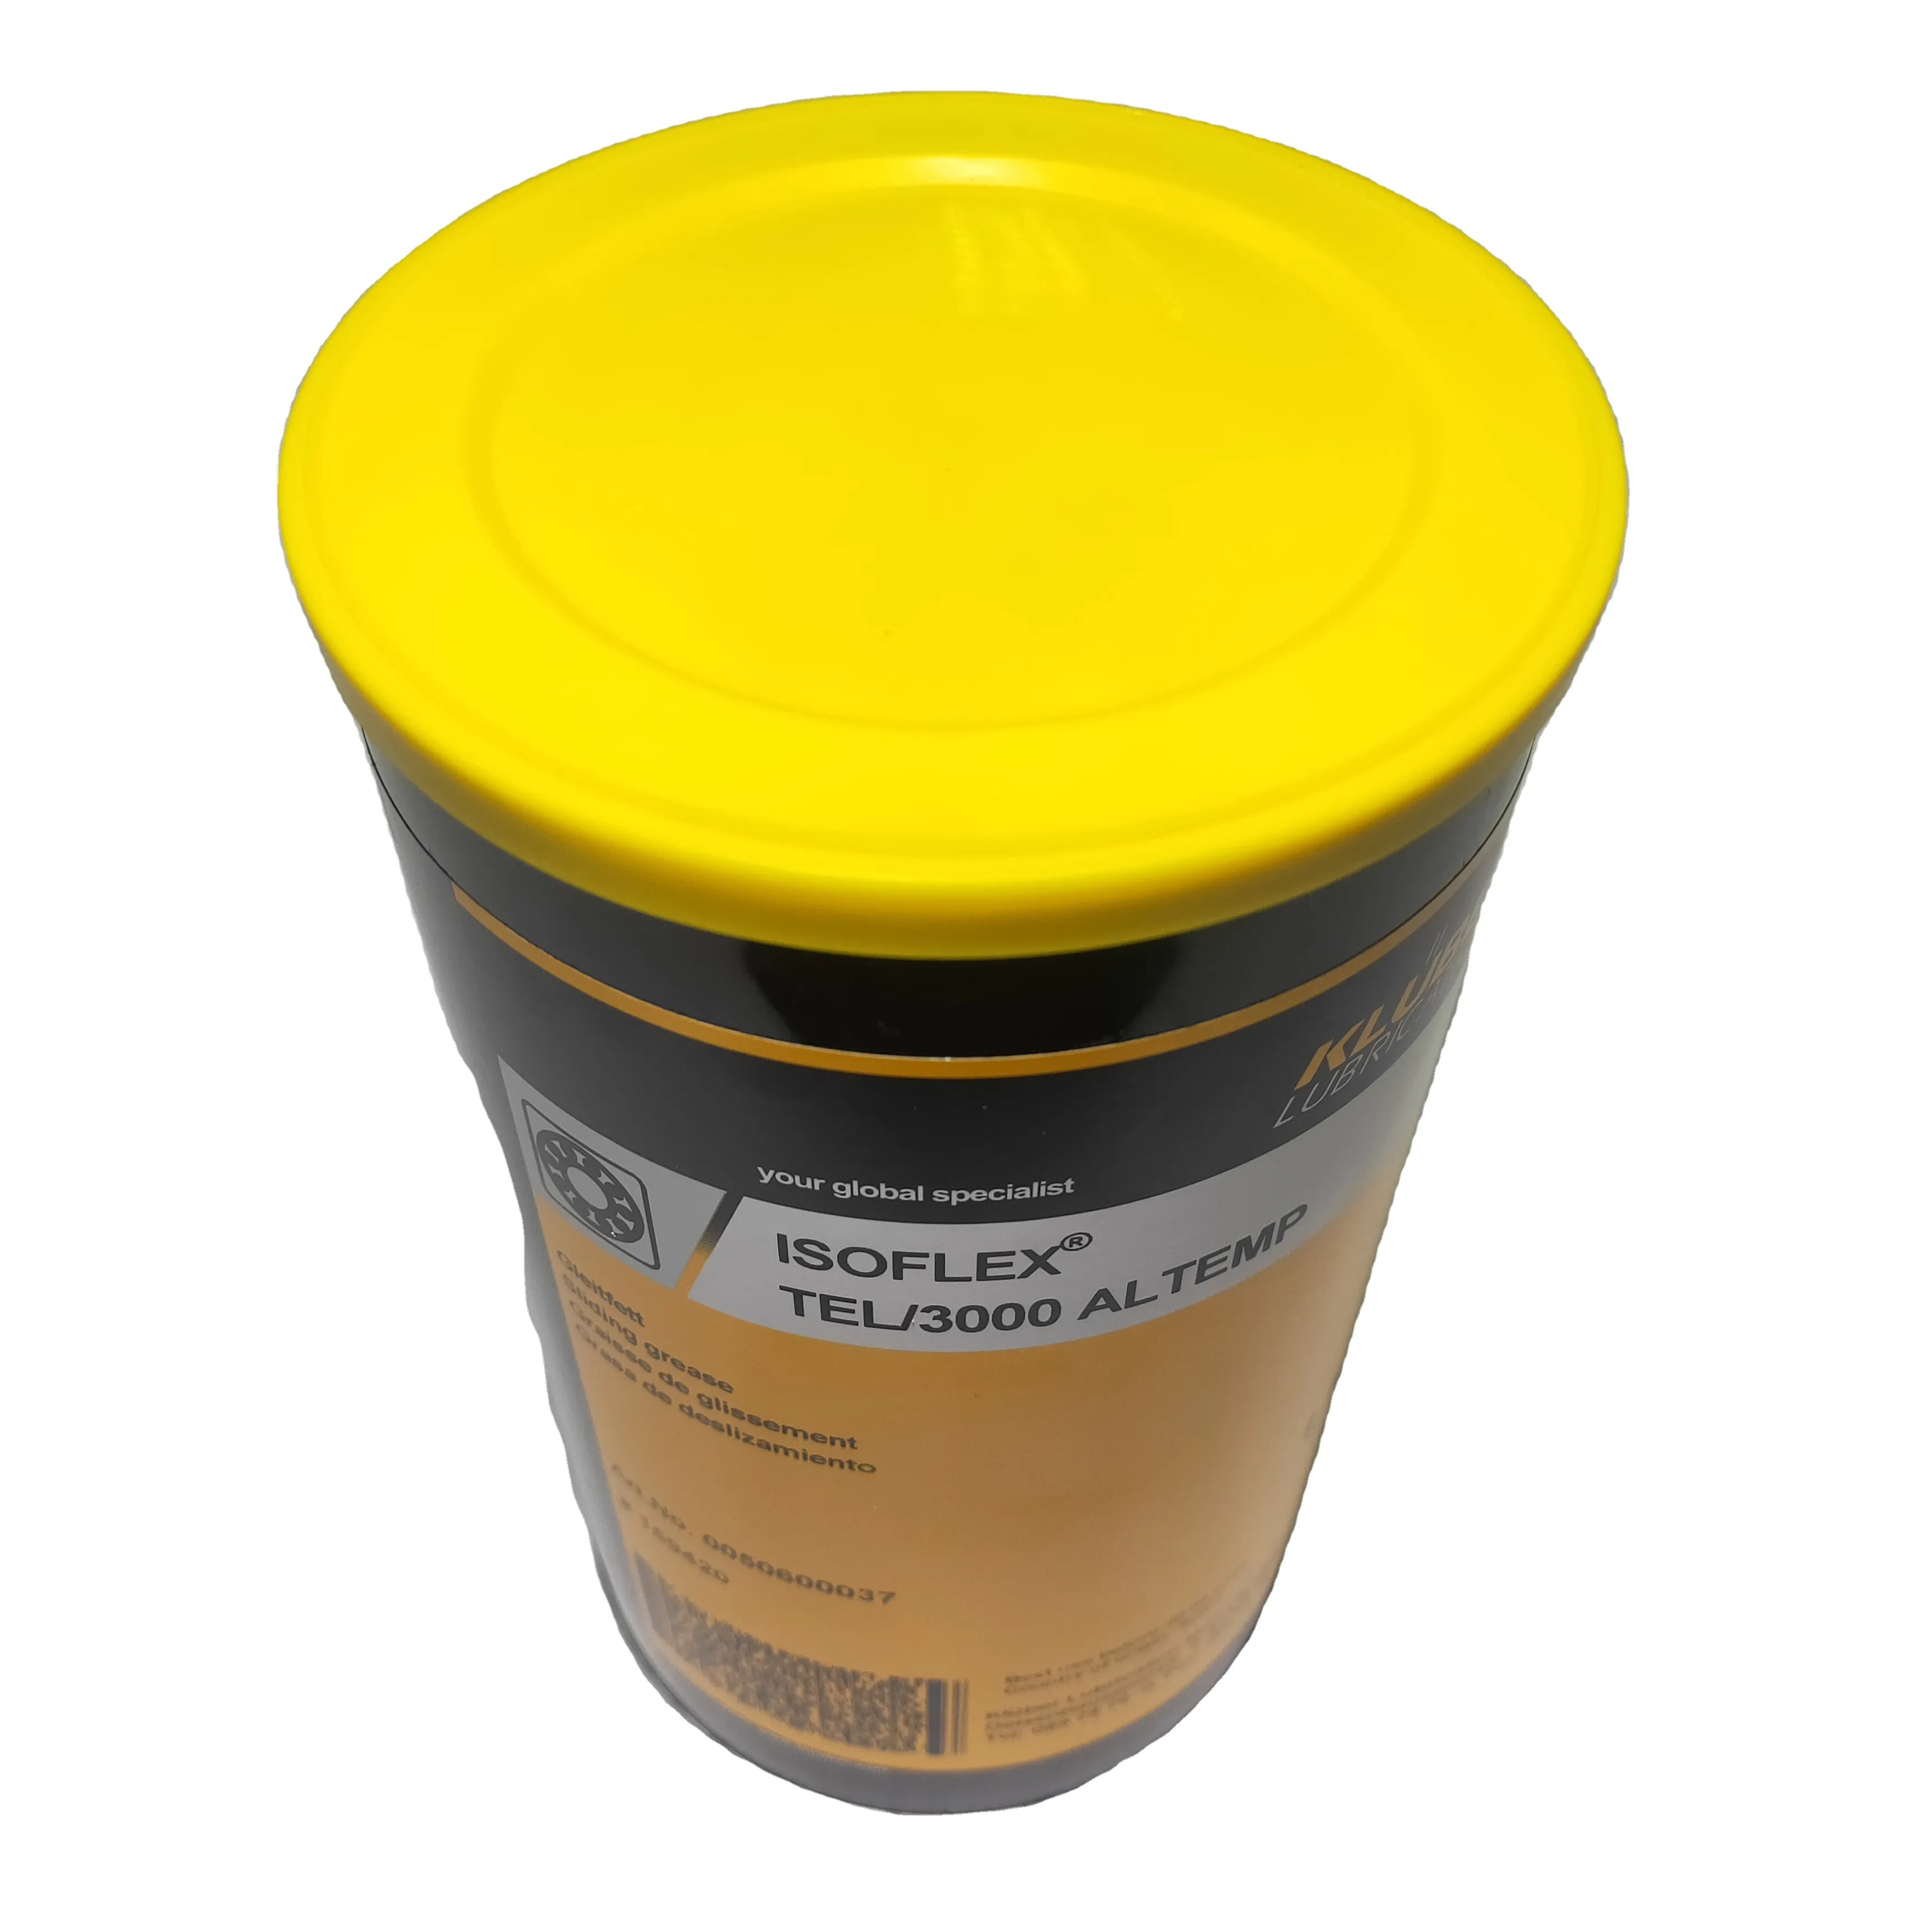 Automotive Lubricants Grease of Kluber Isoflex TEL 3000 ALTEMP 1KG from China Supplier